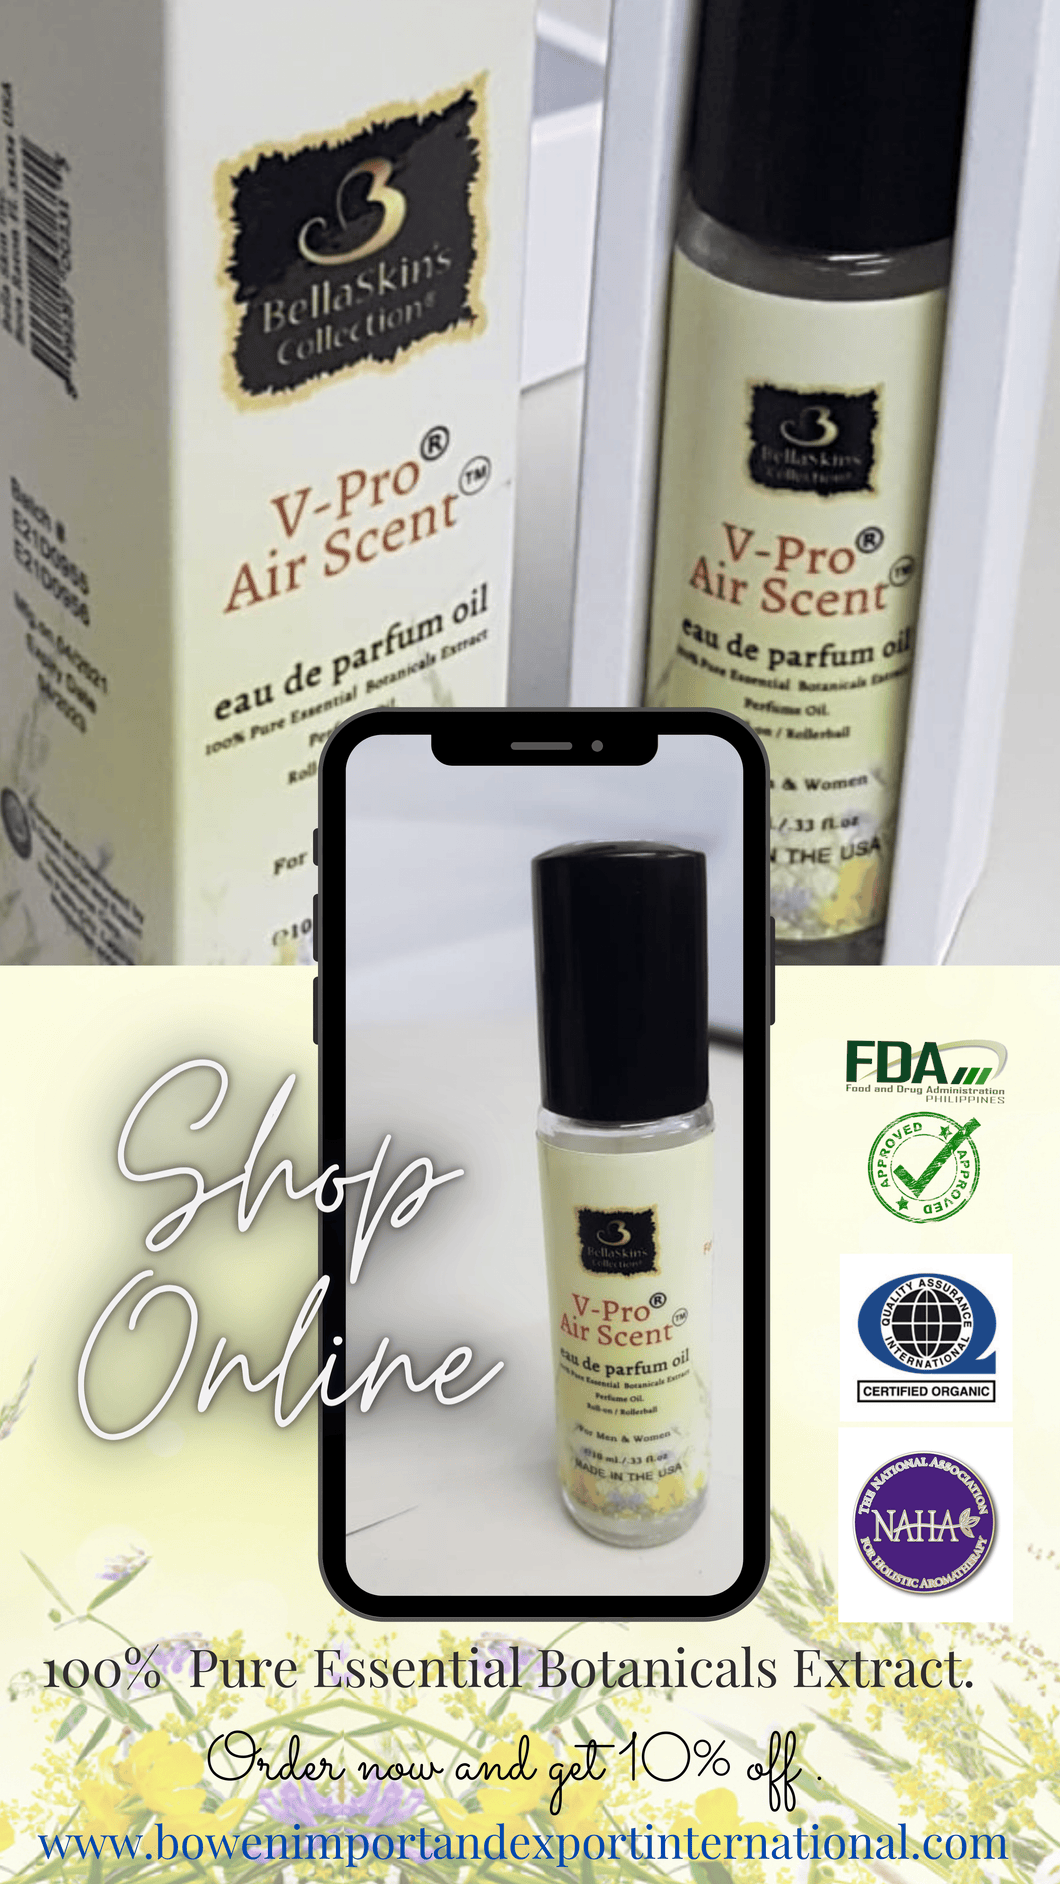 V-PRO AIR SCENT 100% PURE ESSENTIAL BOTANICAL EXTRACTS PERFUME OIL BLEND.